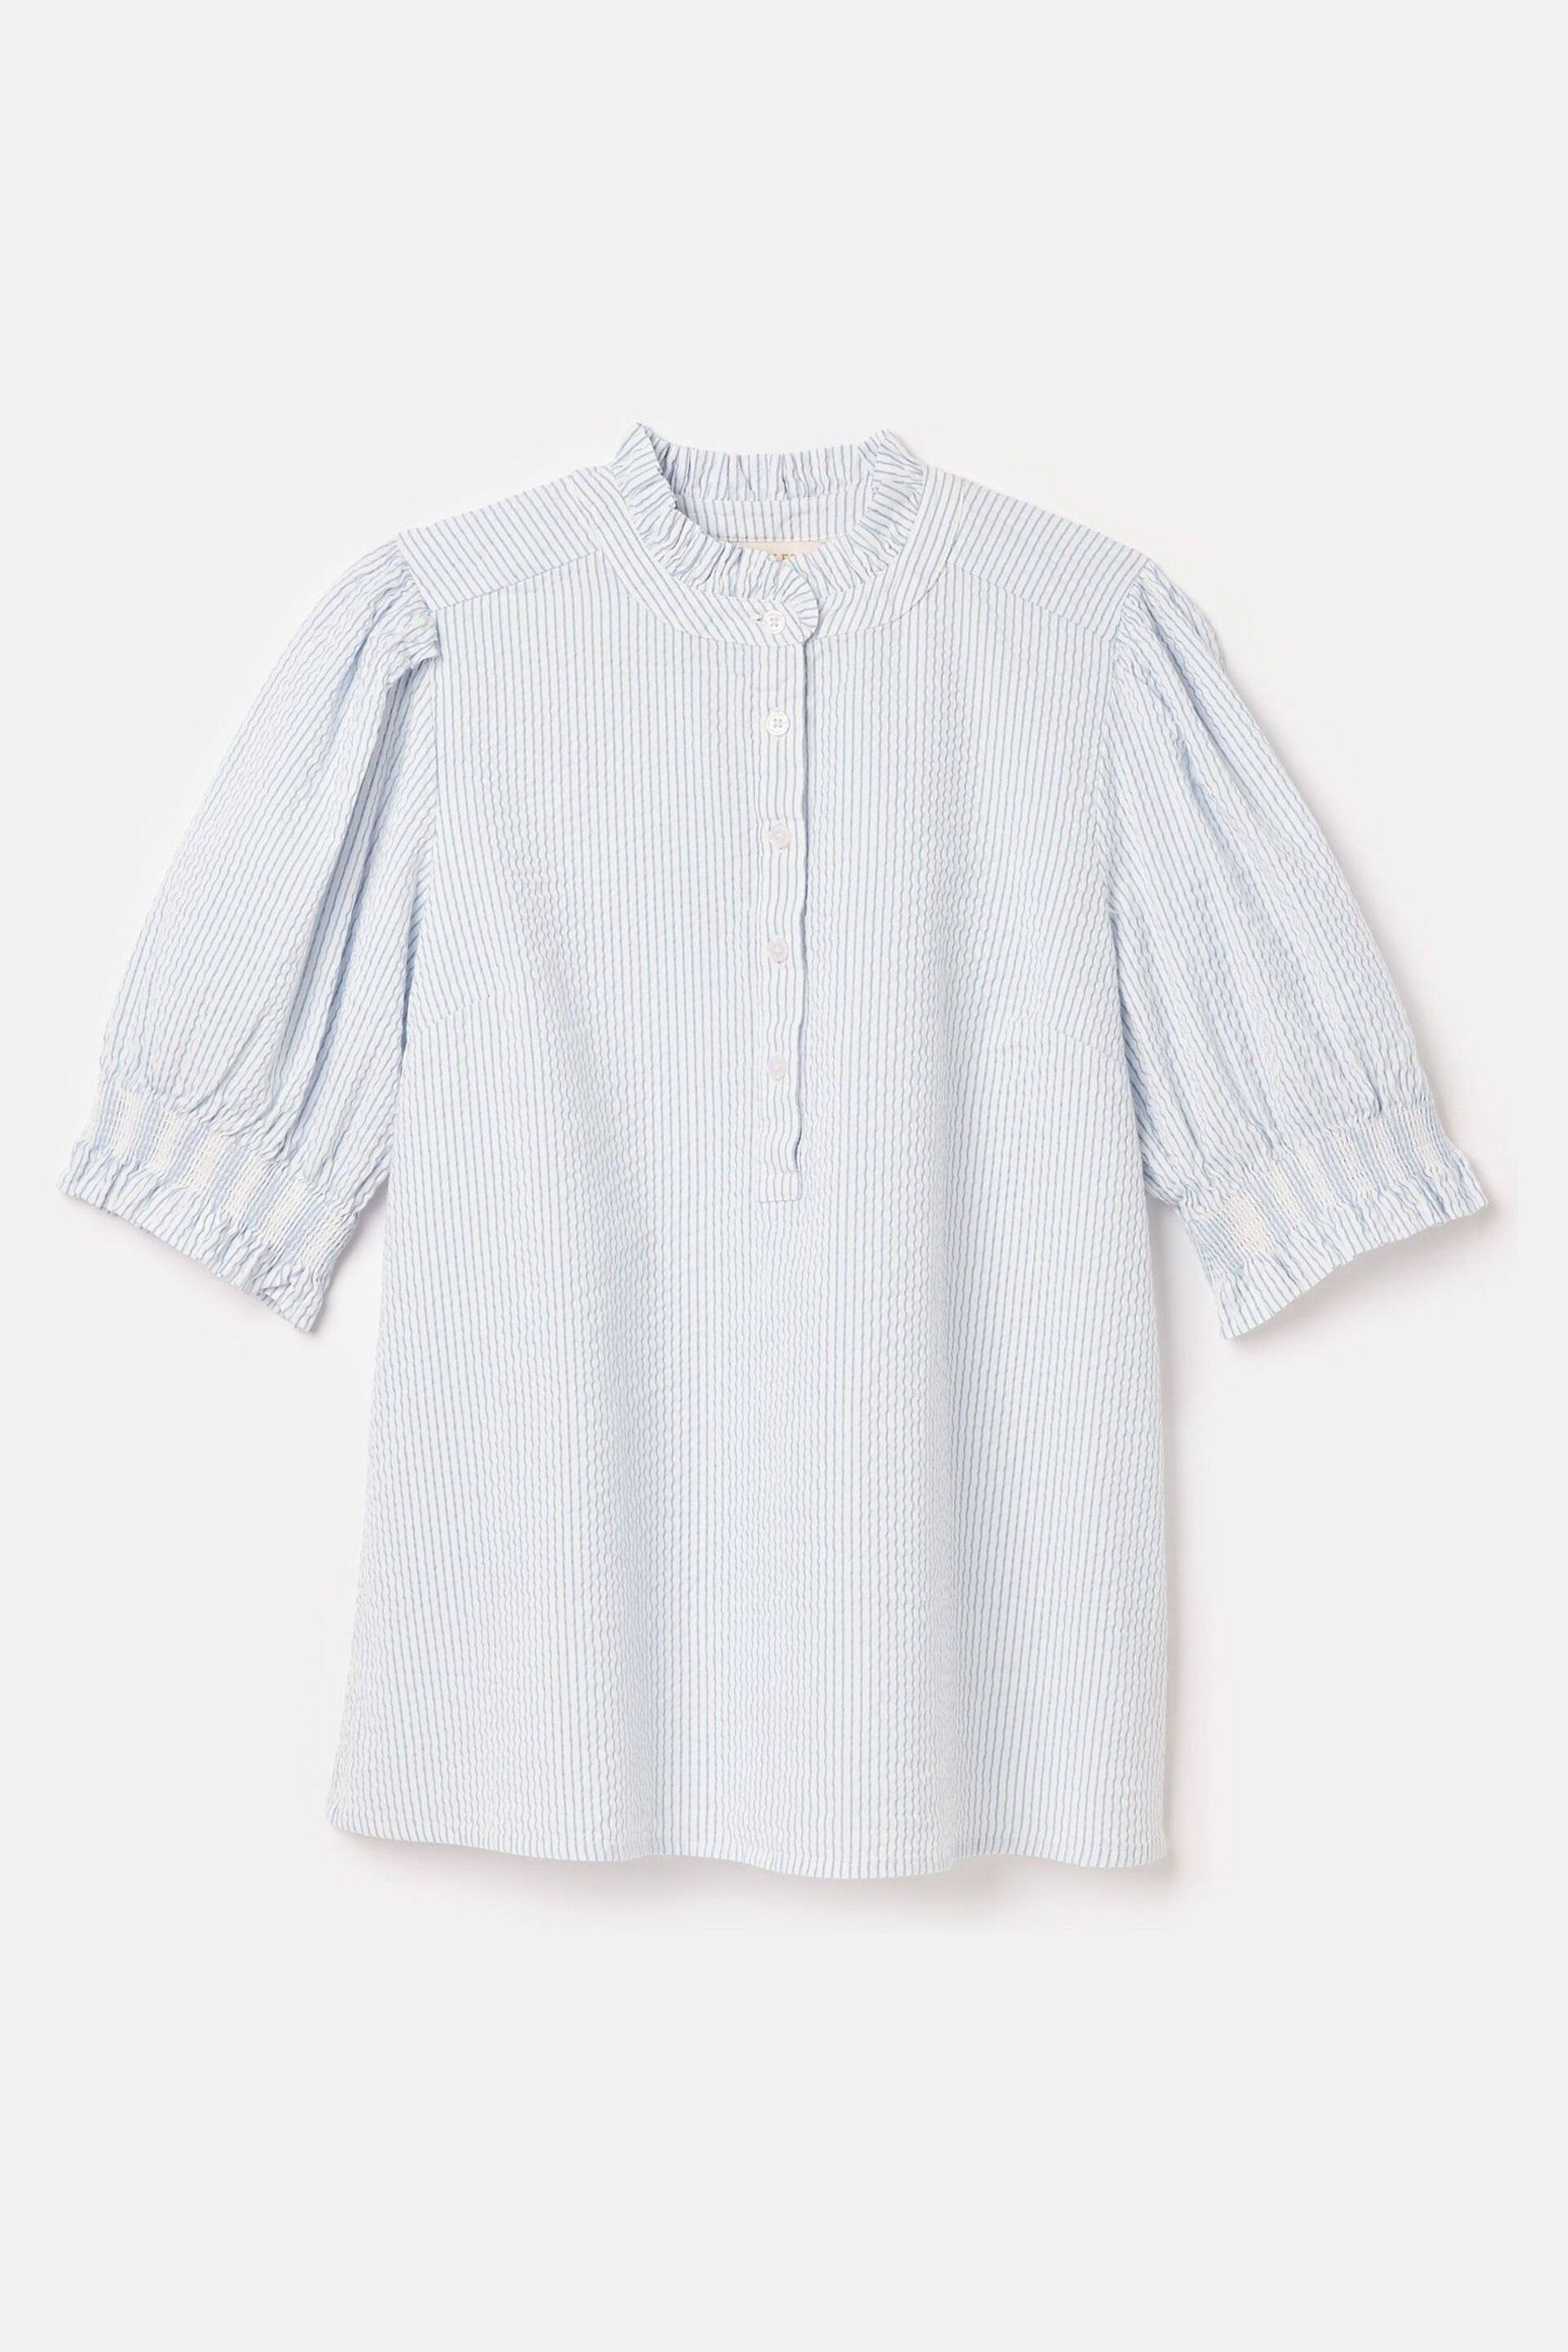 Joules Elle Blue & White Striped Frill Blouse - Image 7 of 7